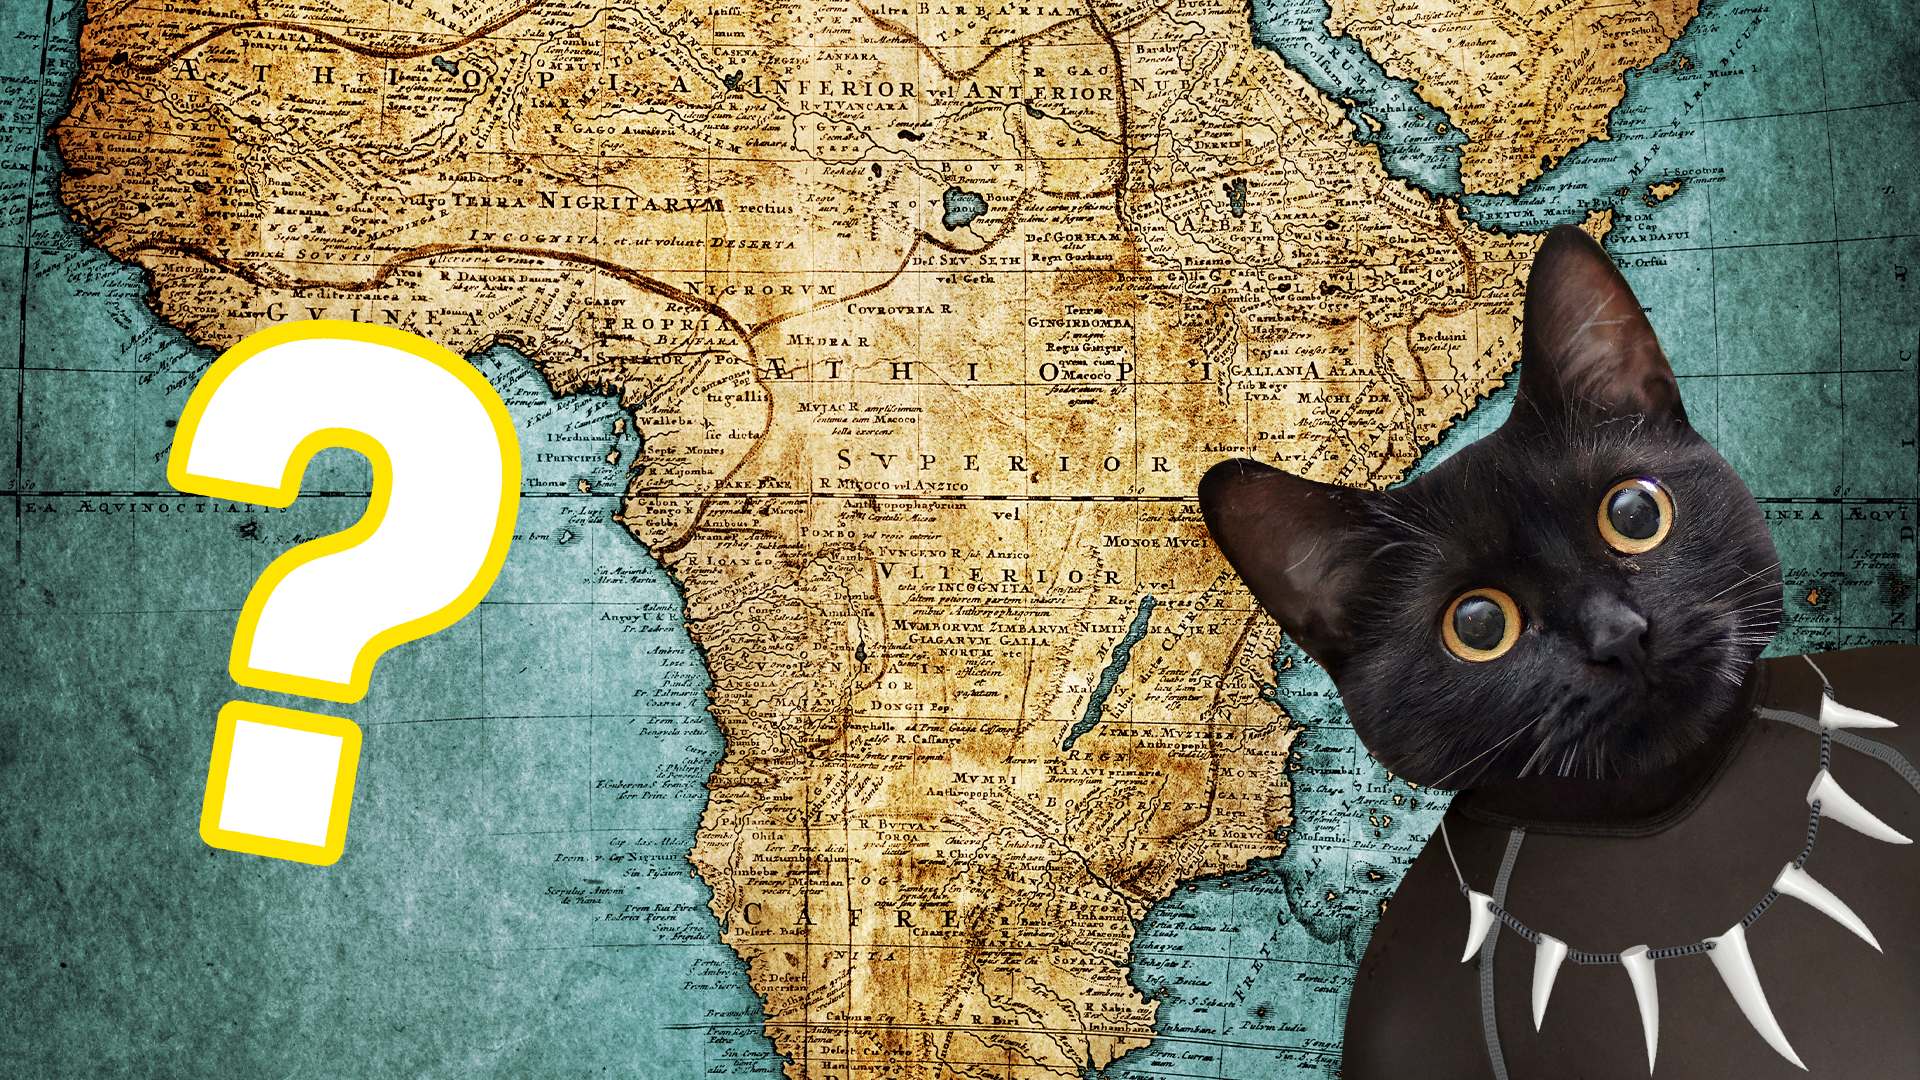 Map of Africa with question mark and Beano Black Panther